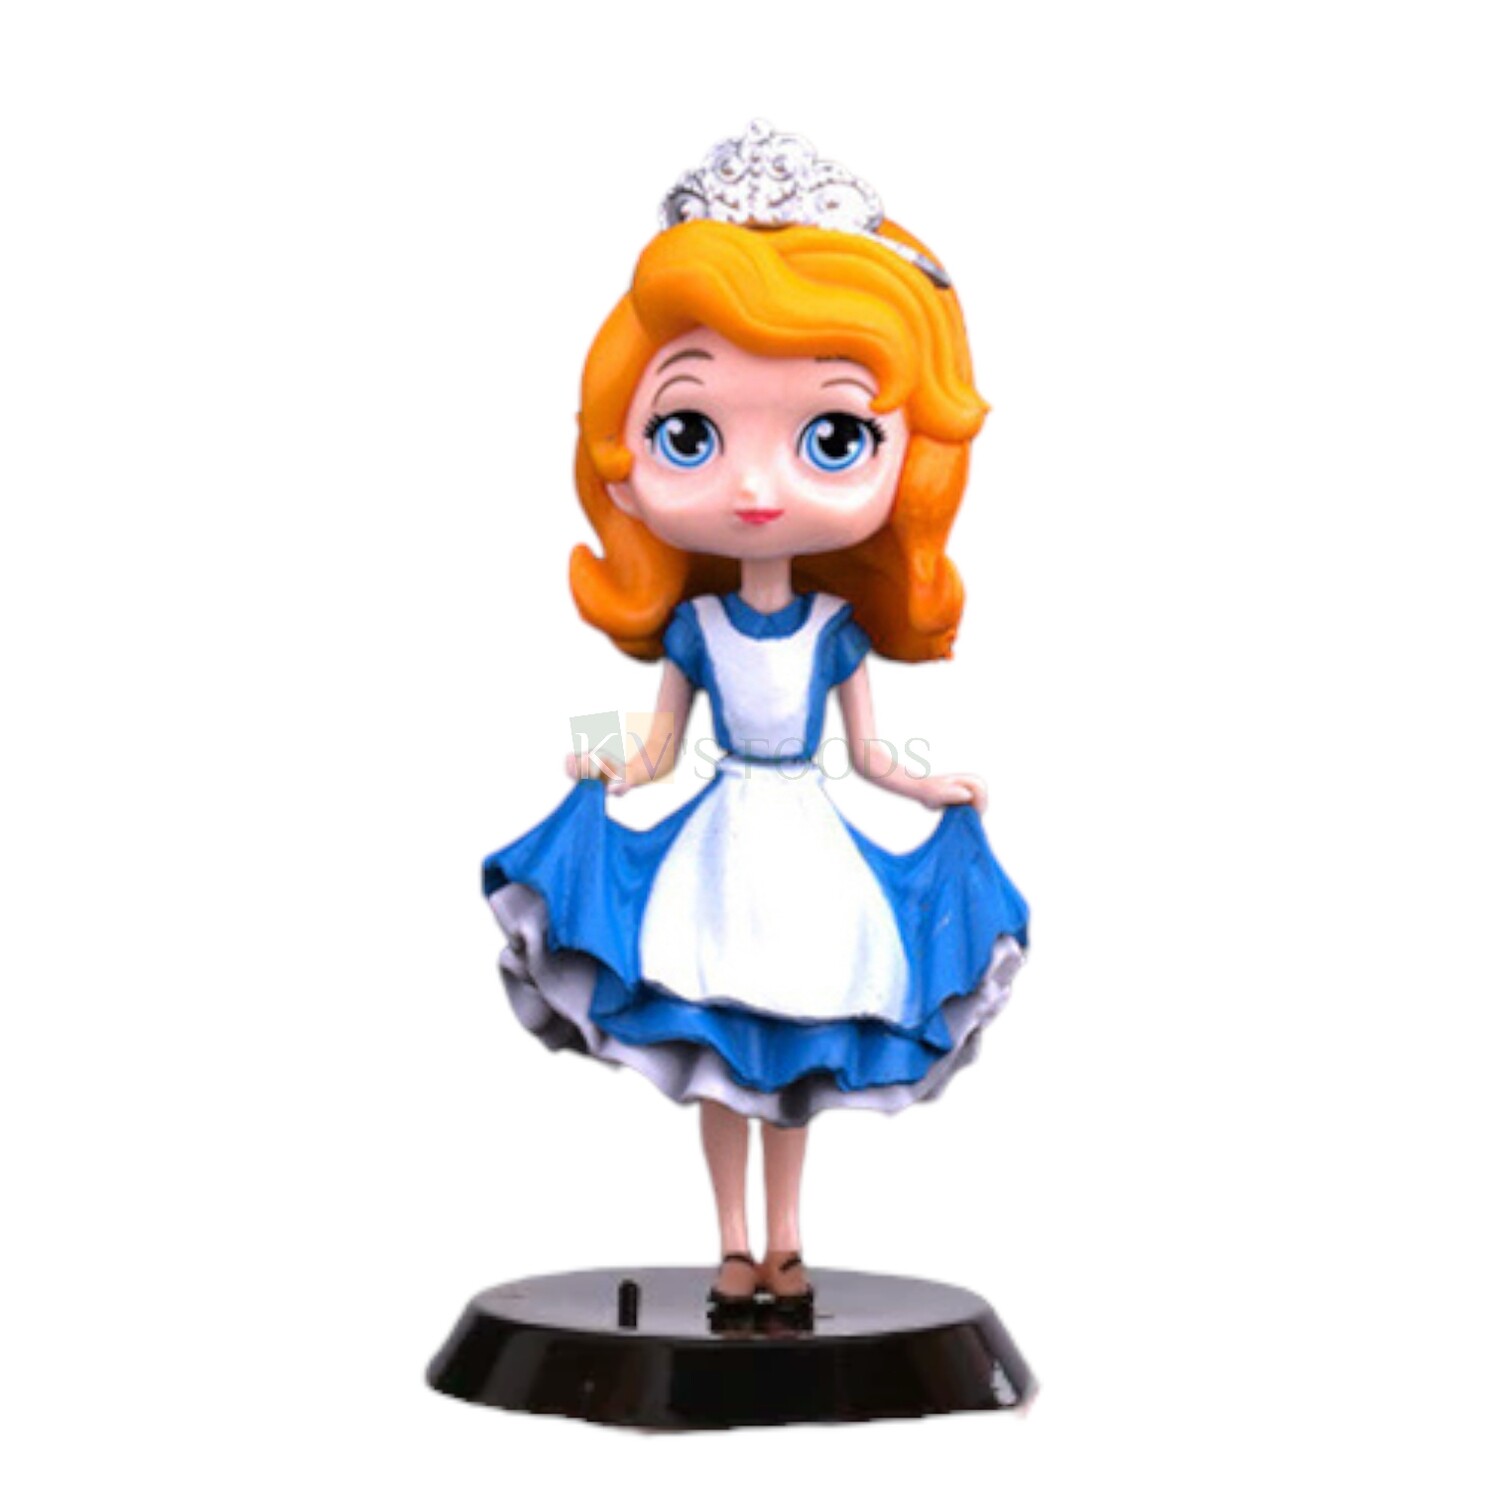 11CM (~4Inches) Disney Alice in Wonderland Kawaii Q Style Doll Cake Topper Toy Cake Topper, Girls Big Eyes Doll with Black Base, Action Miniature Figurine, DIY Cake Decoration Accessories